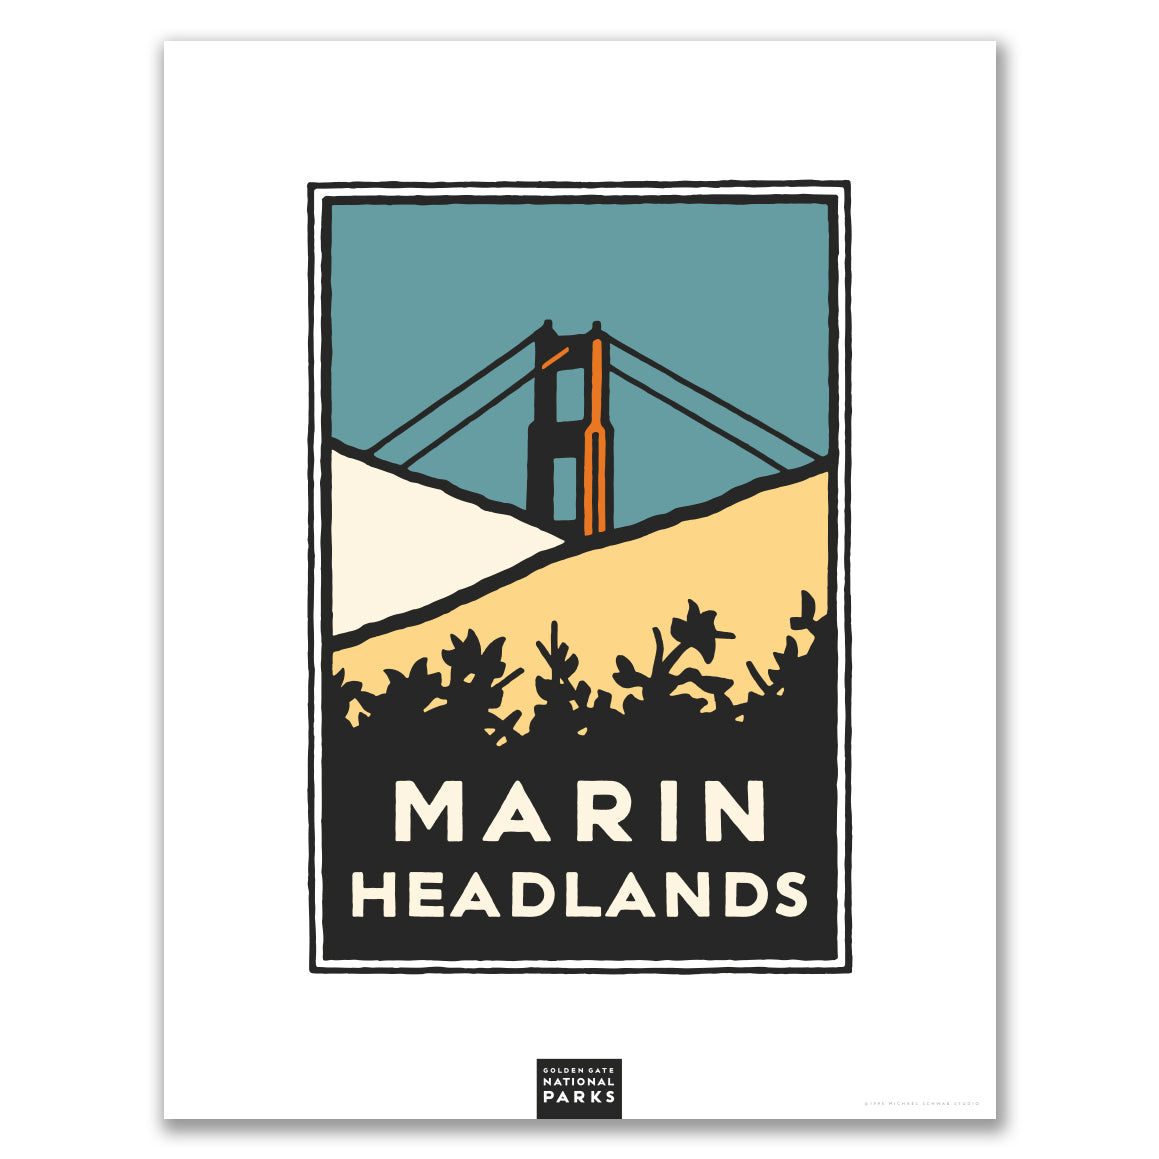 Multicolor Marin Headlands giclee poster print, with art by Michael Schwab